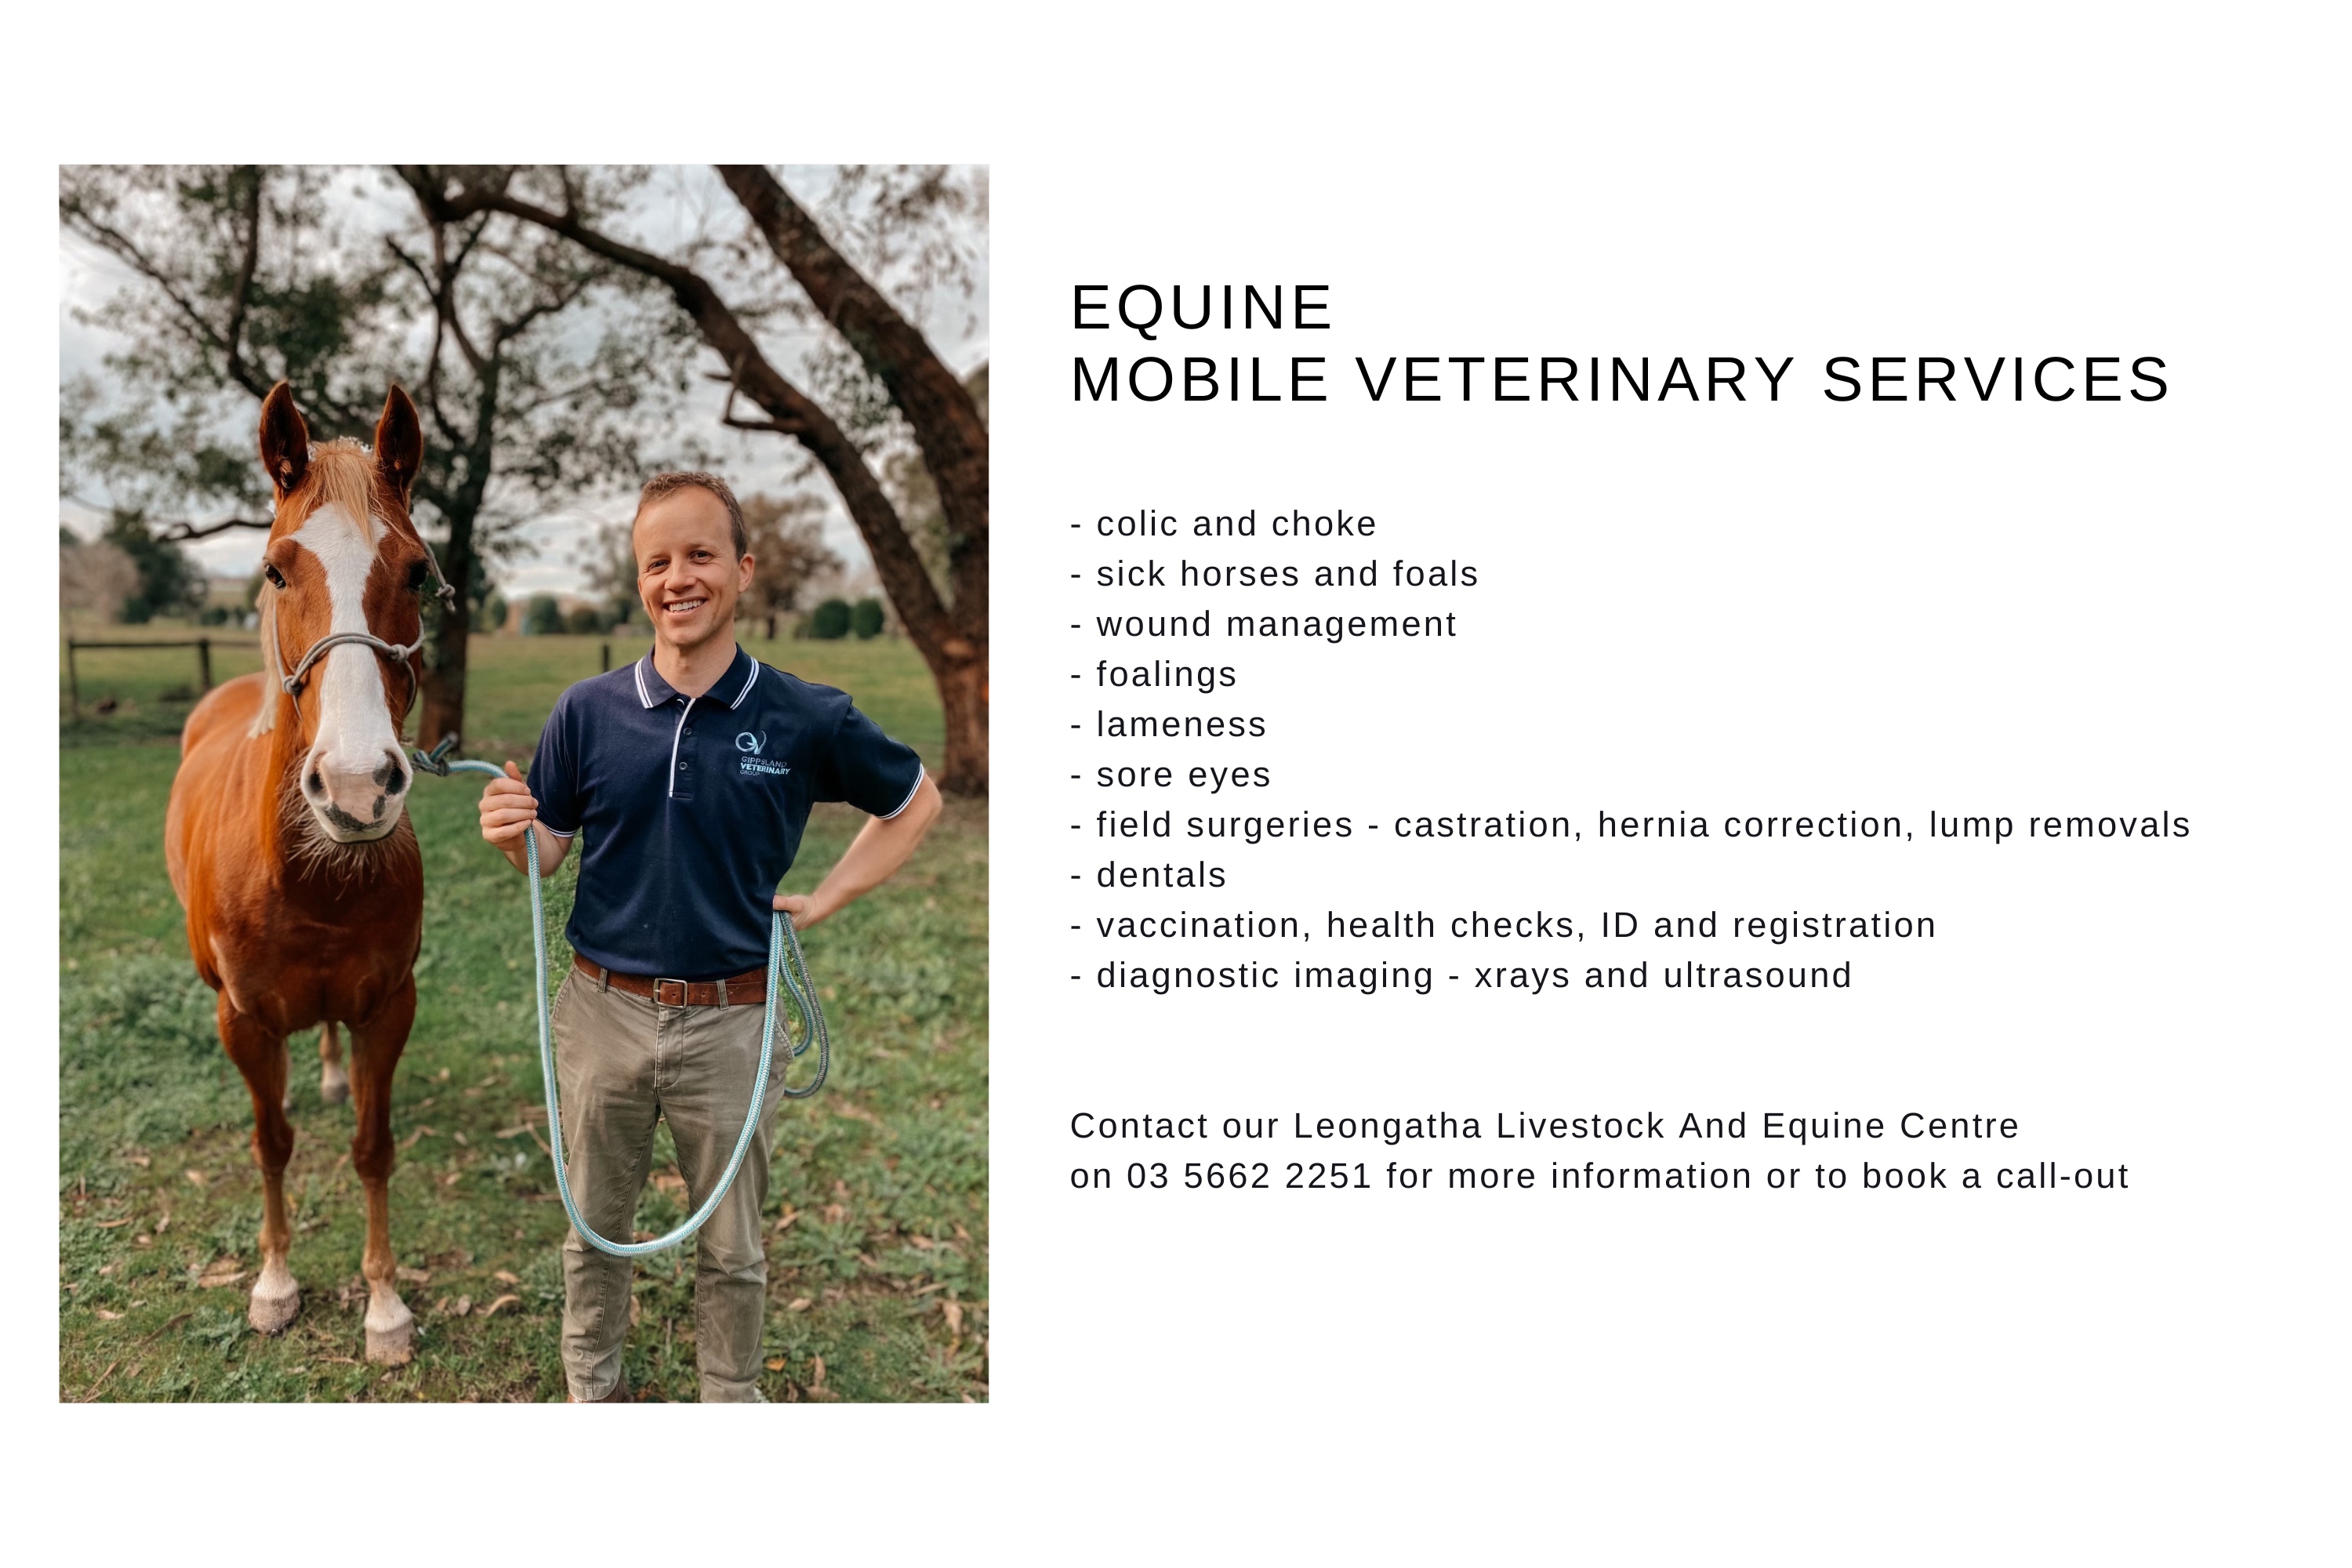 Mobile Veterinary Services1 1 